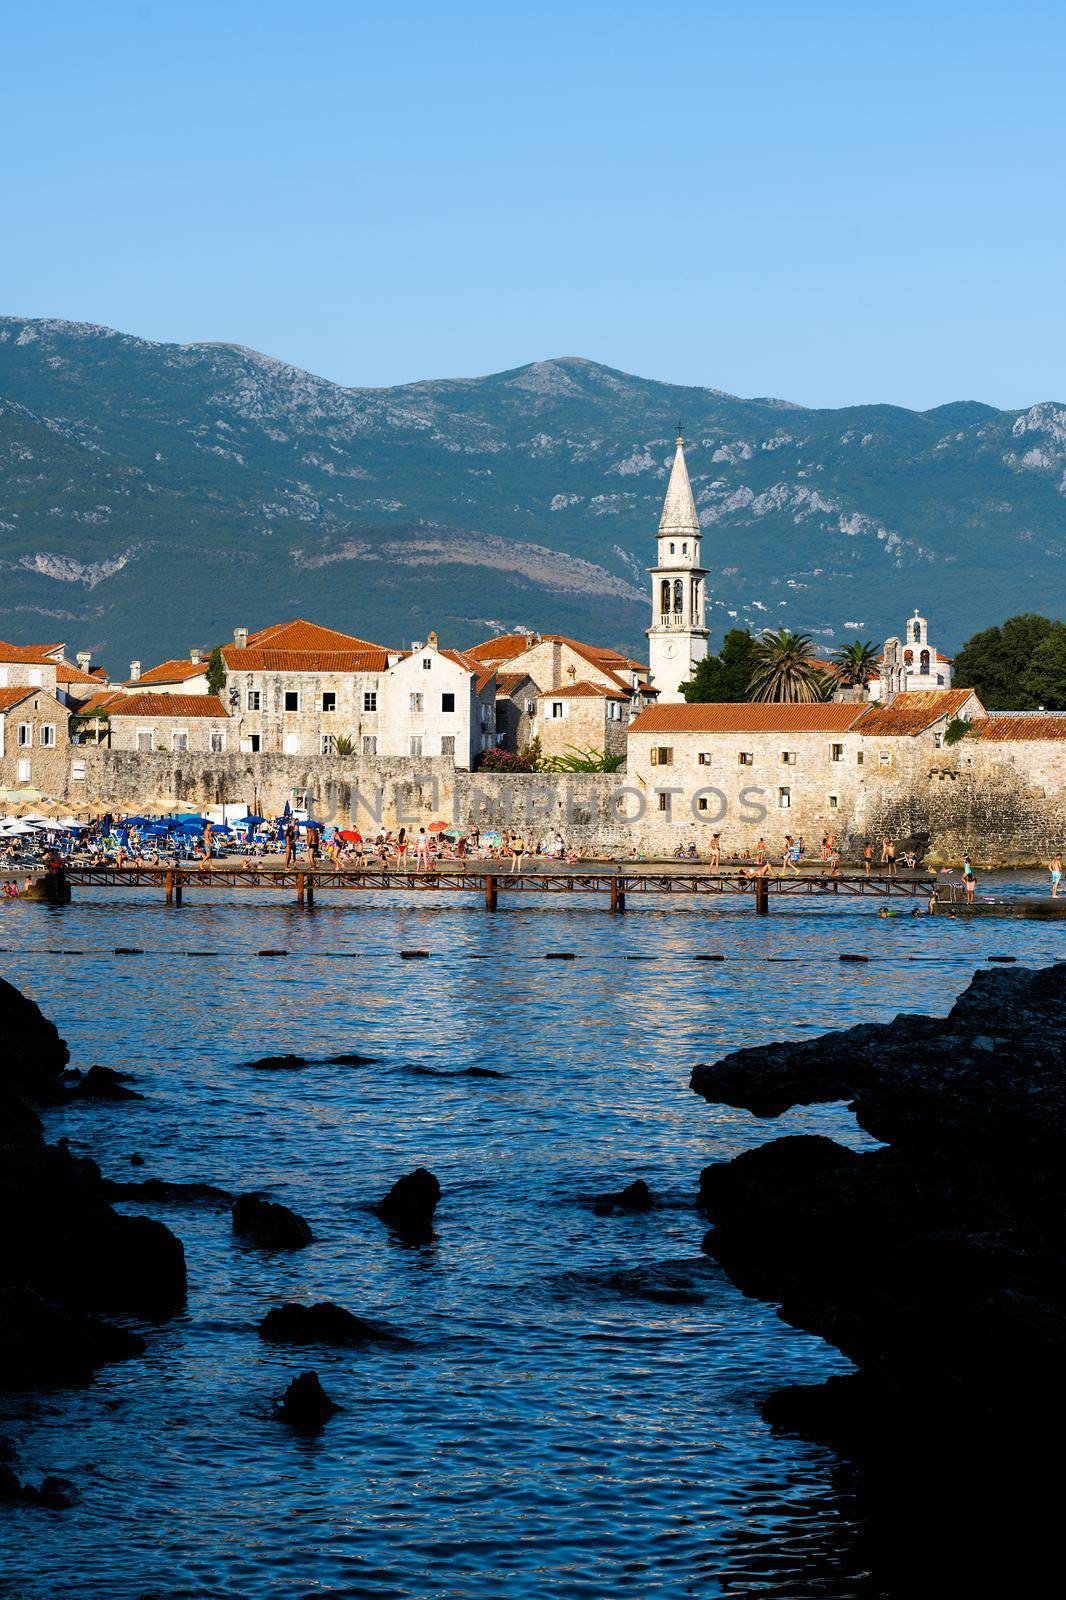 Ancient Budva, Montenegro scenic view from adriatic sea. Old mediterranean architecture surrounded with mountains in summer